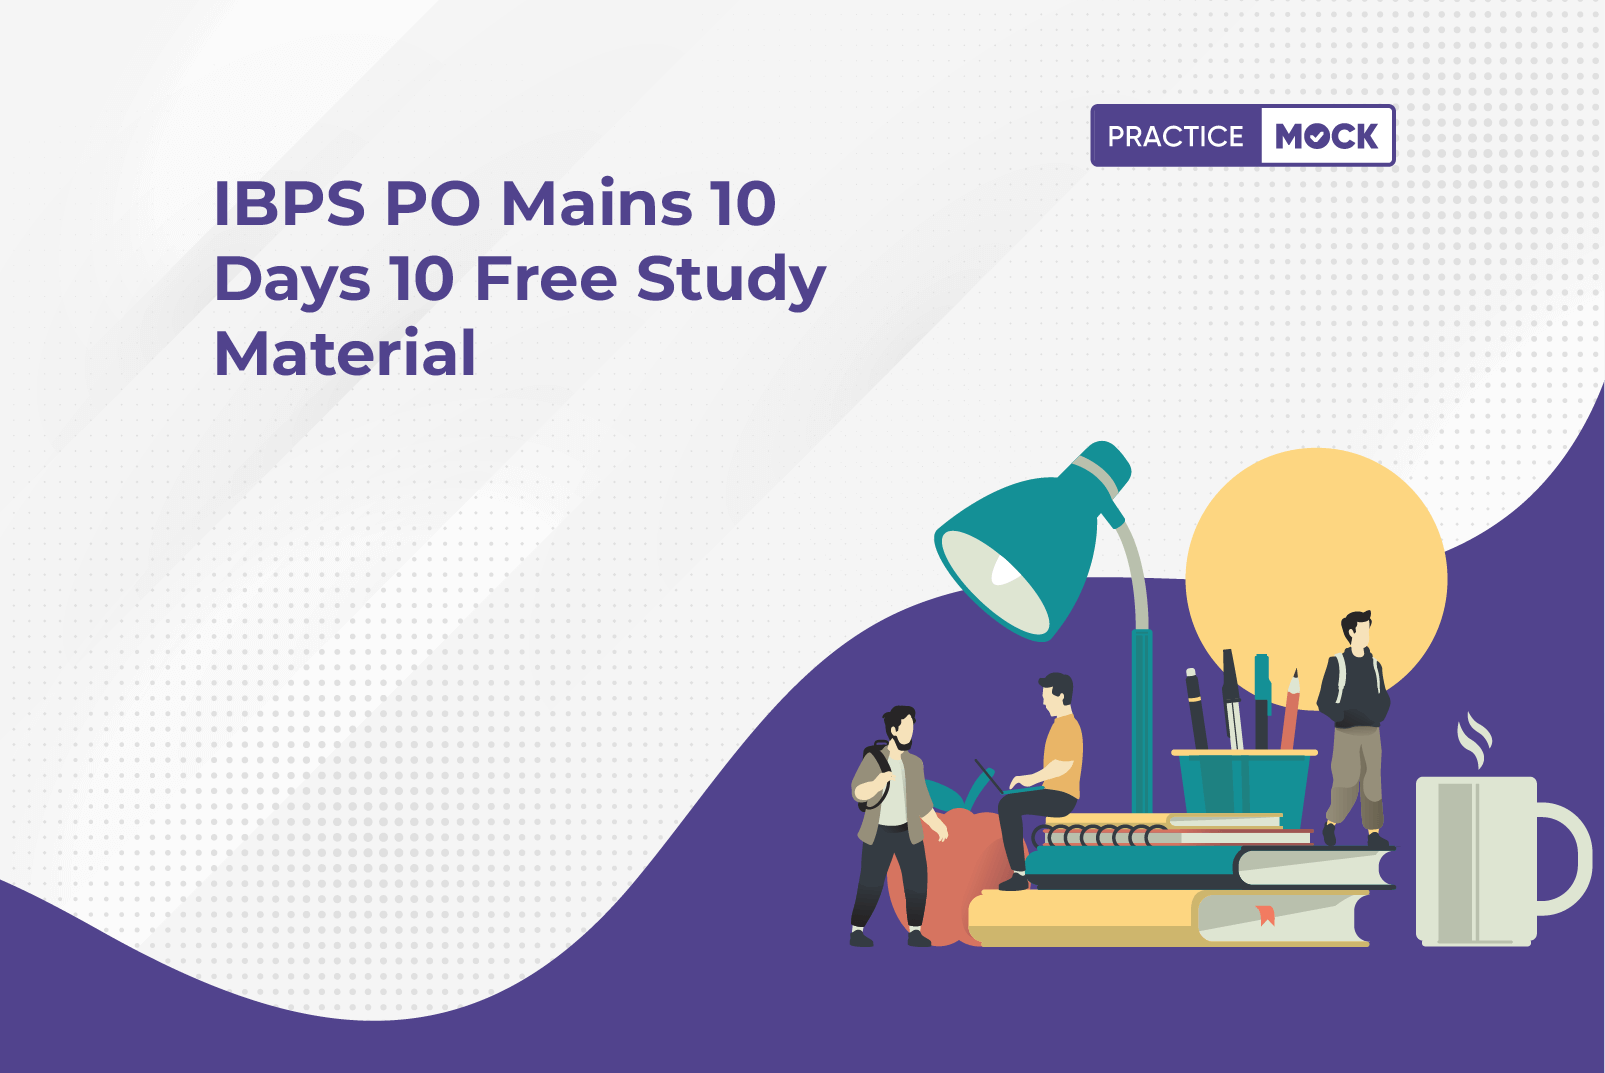 IBPS PO Mains 10 Days 10 Free Study Material